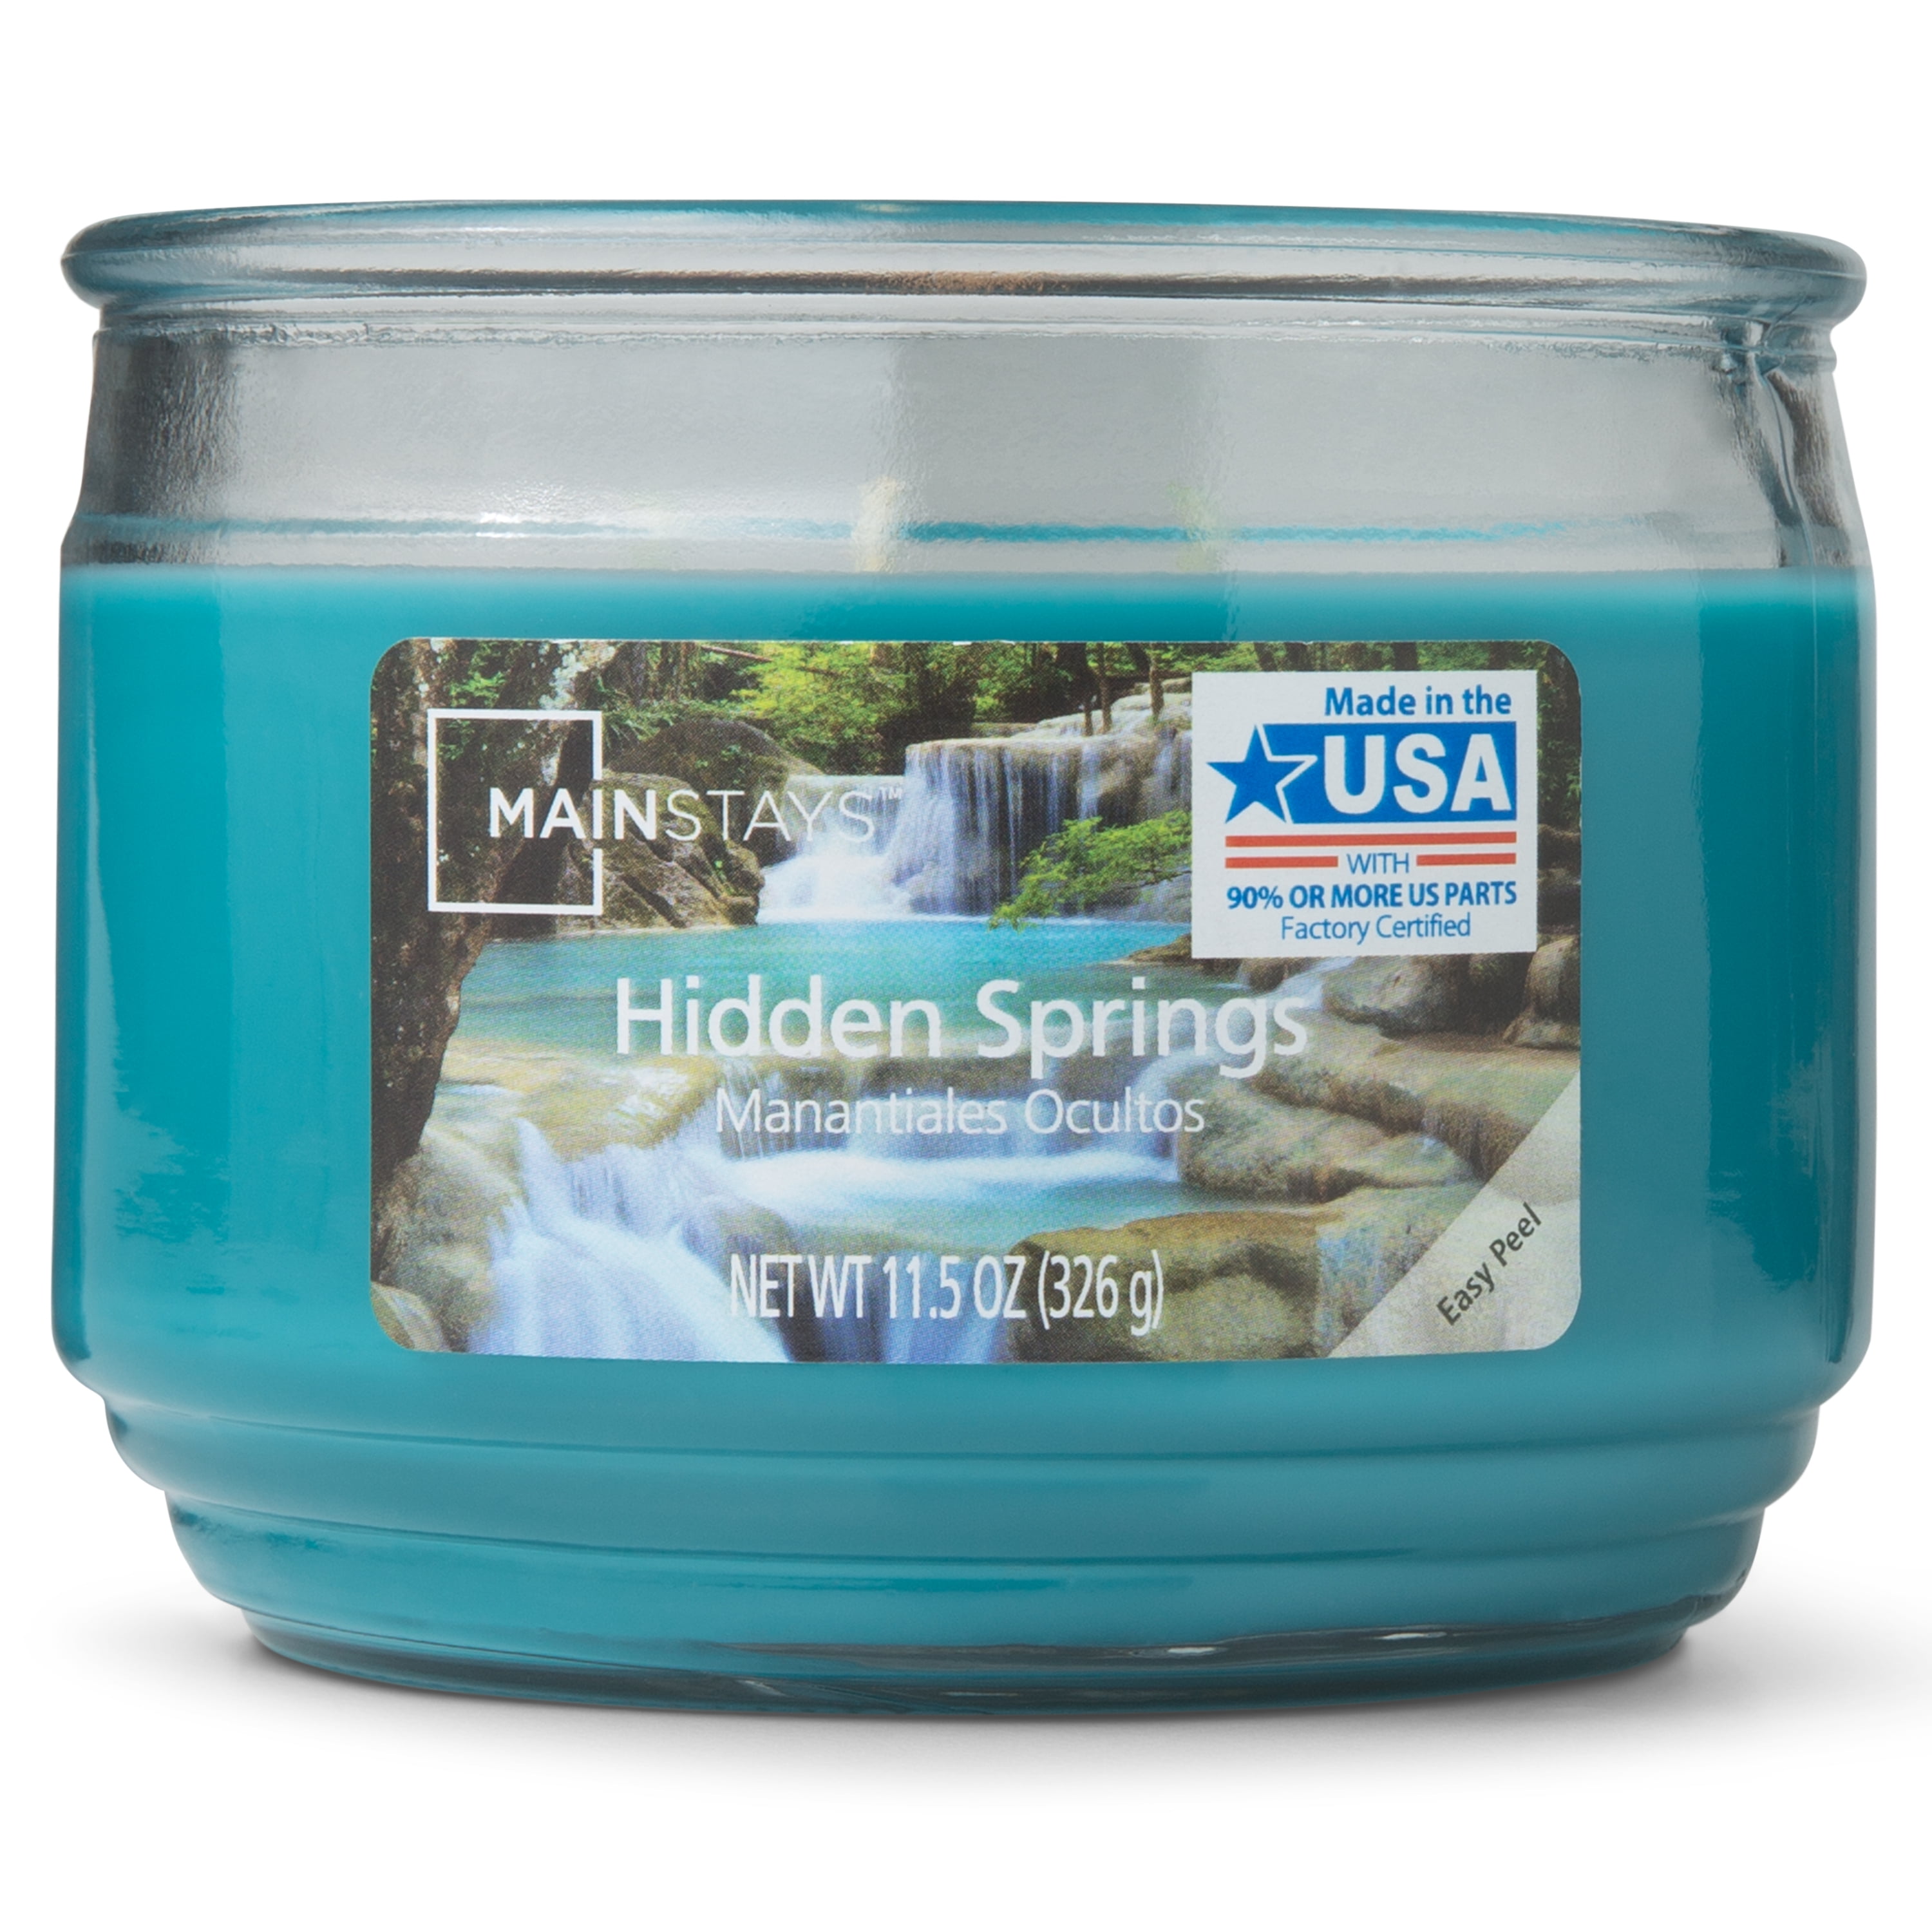 Mainstays Hidden Springs Scented 3-Wick Glass Jar Candle, 11.5 oz.